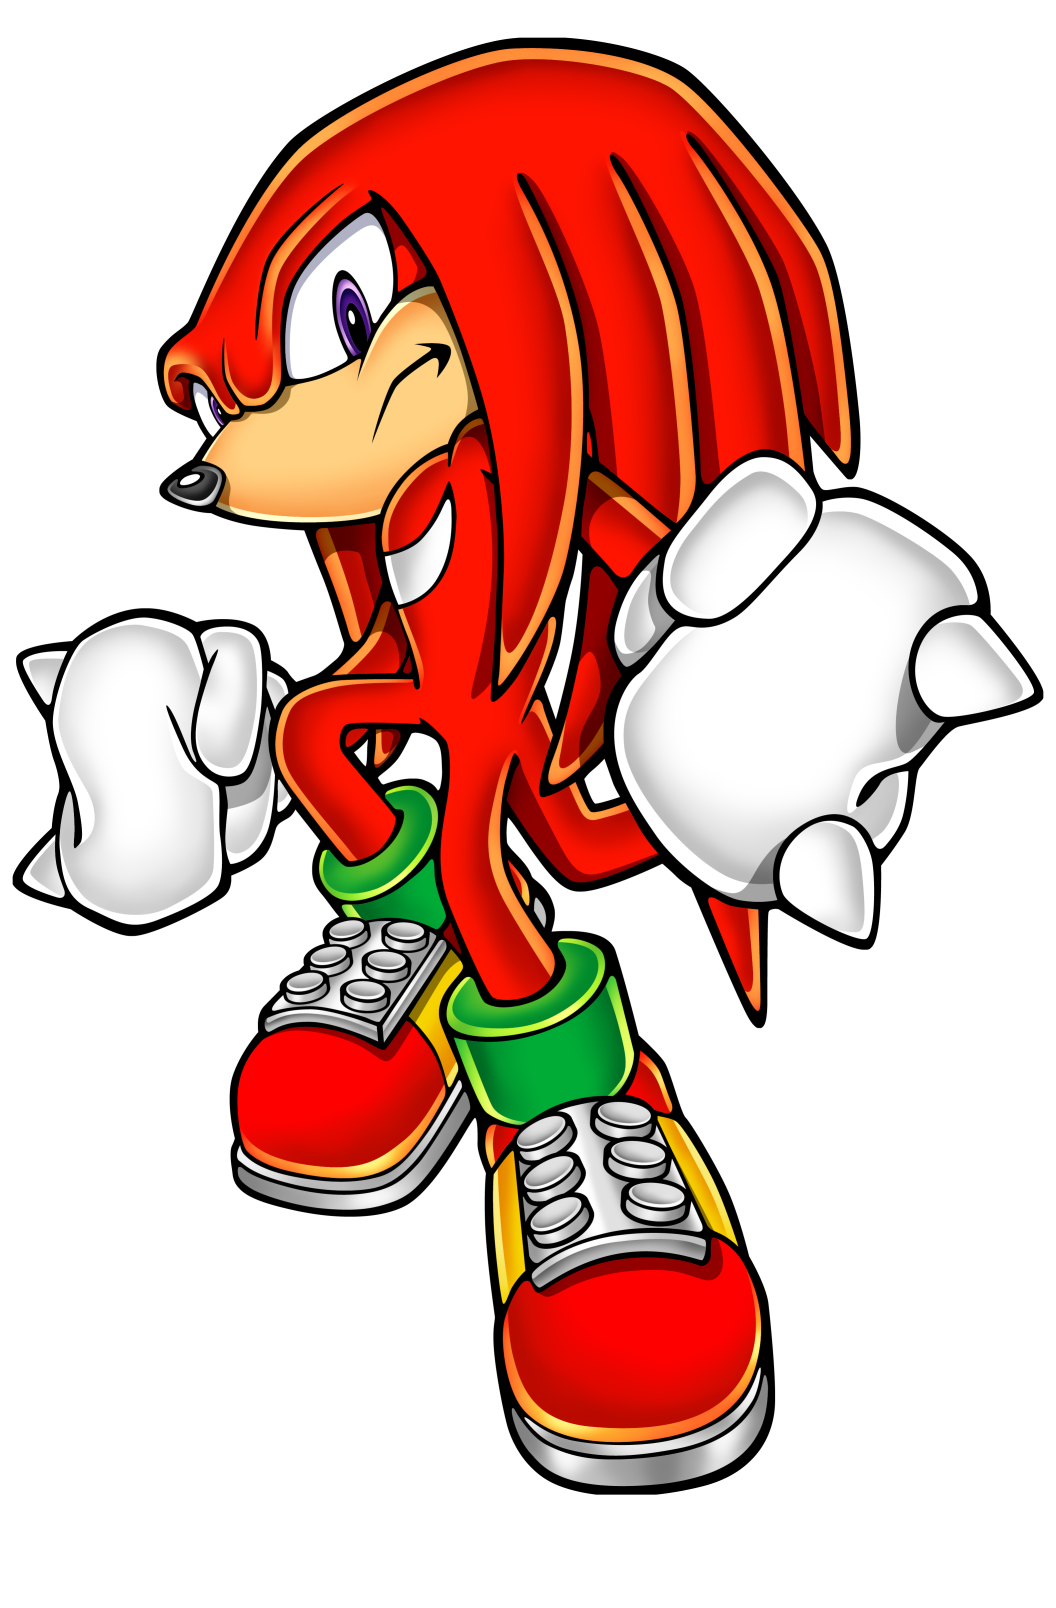 Knuckles the echidna gallery. Technology clipart advanced